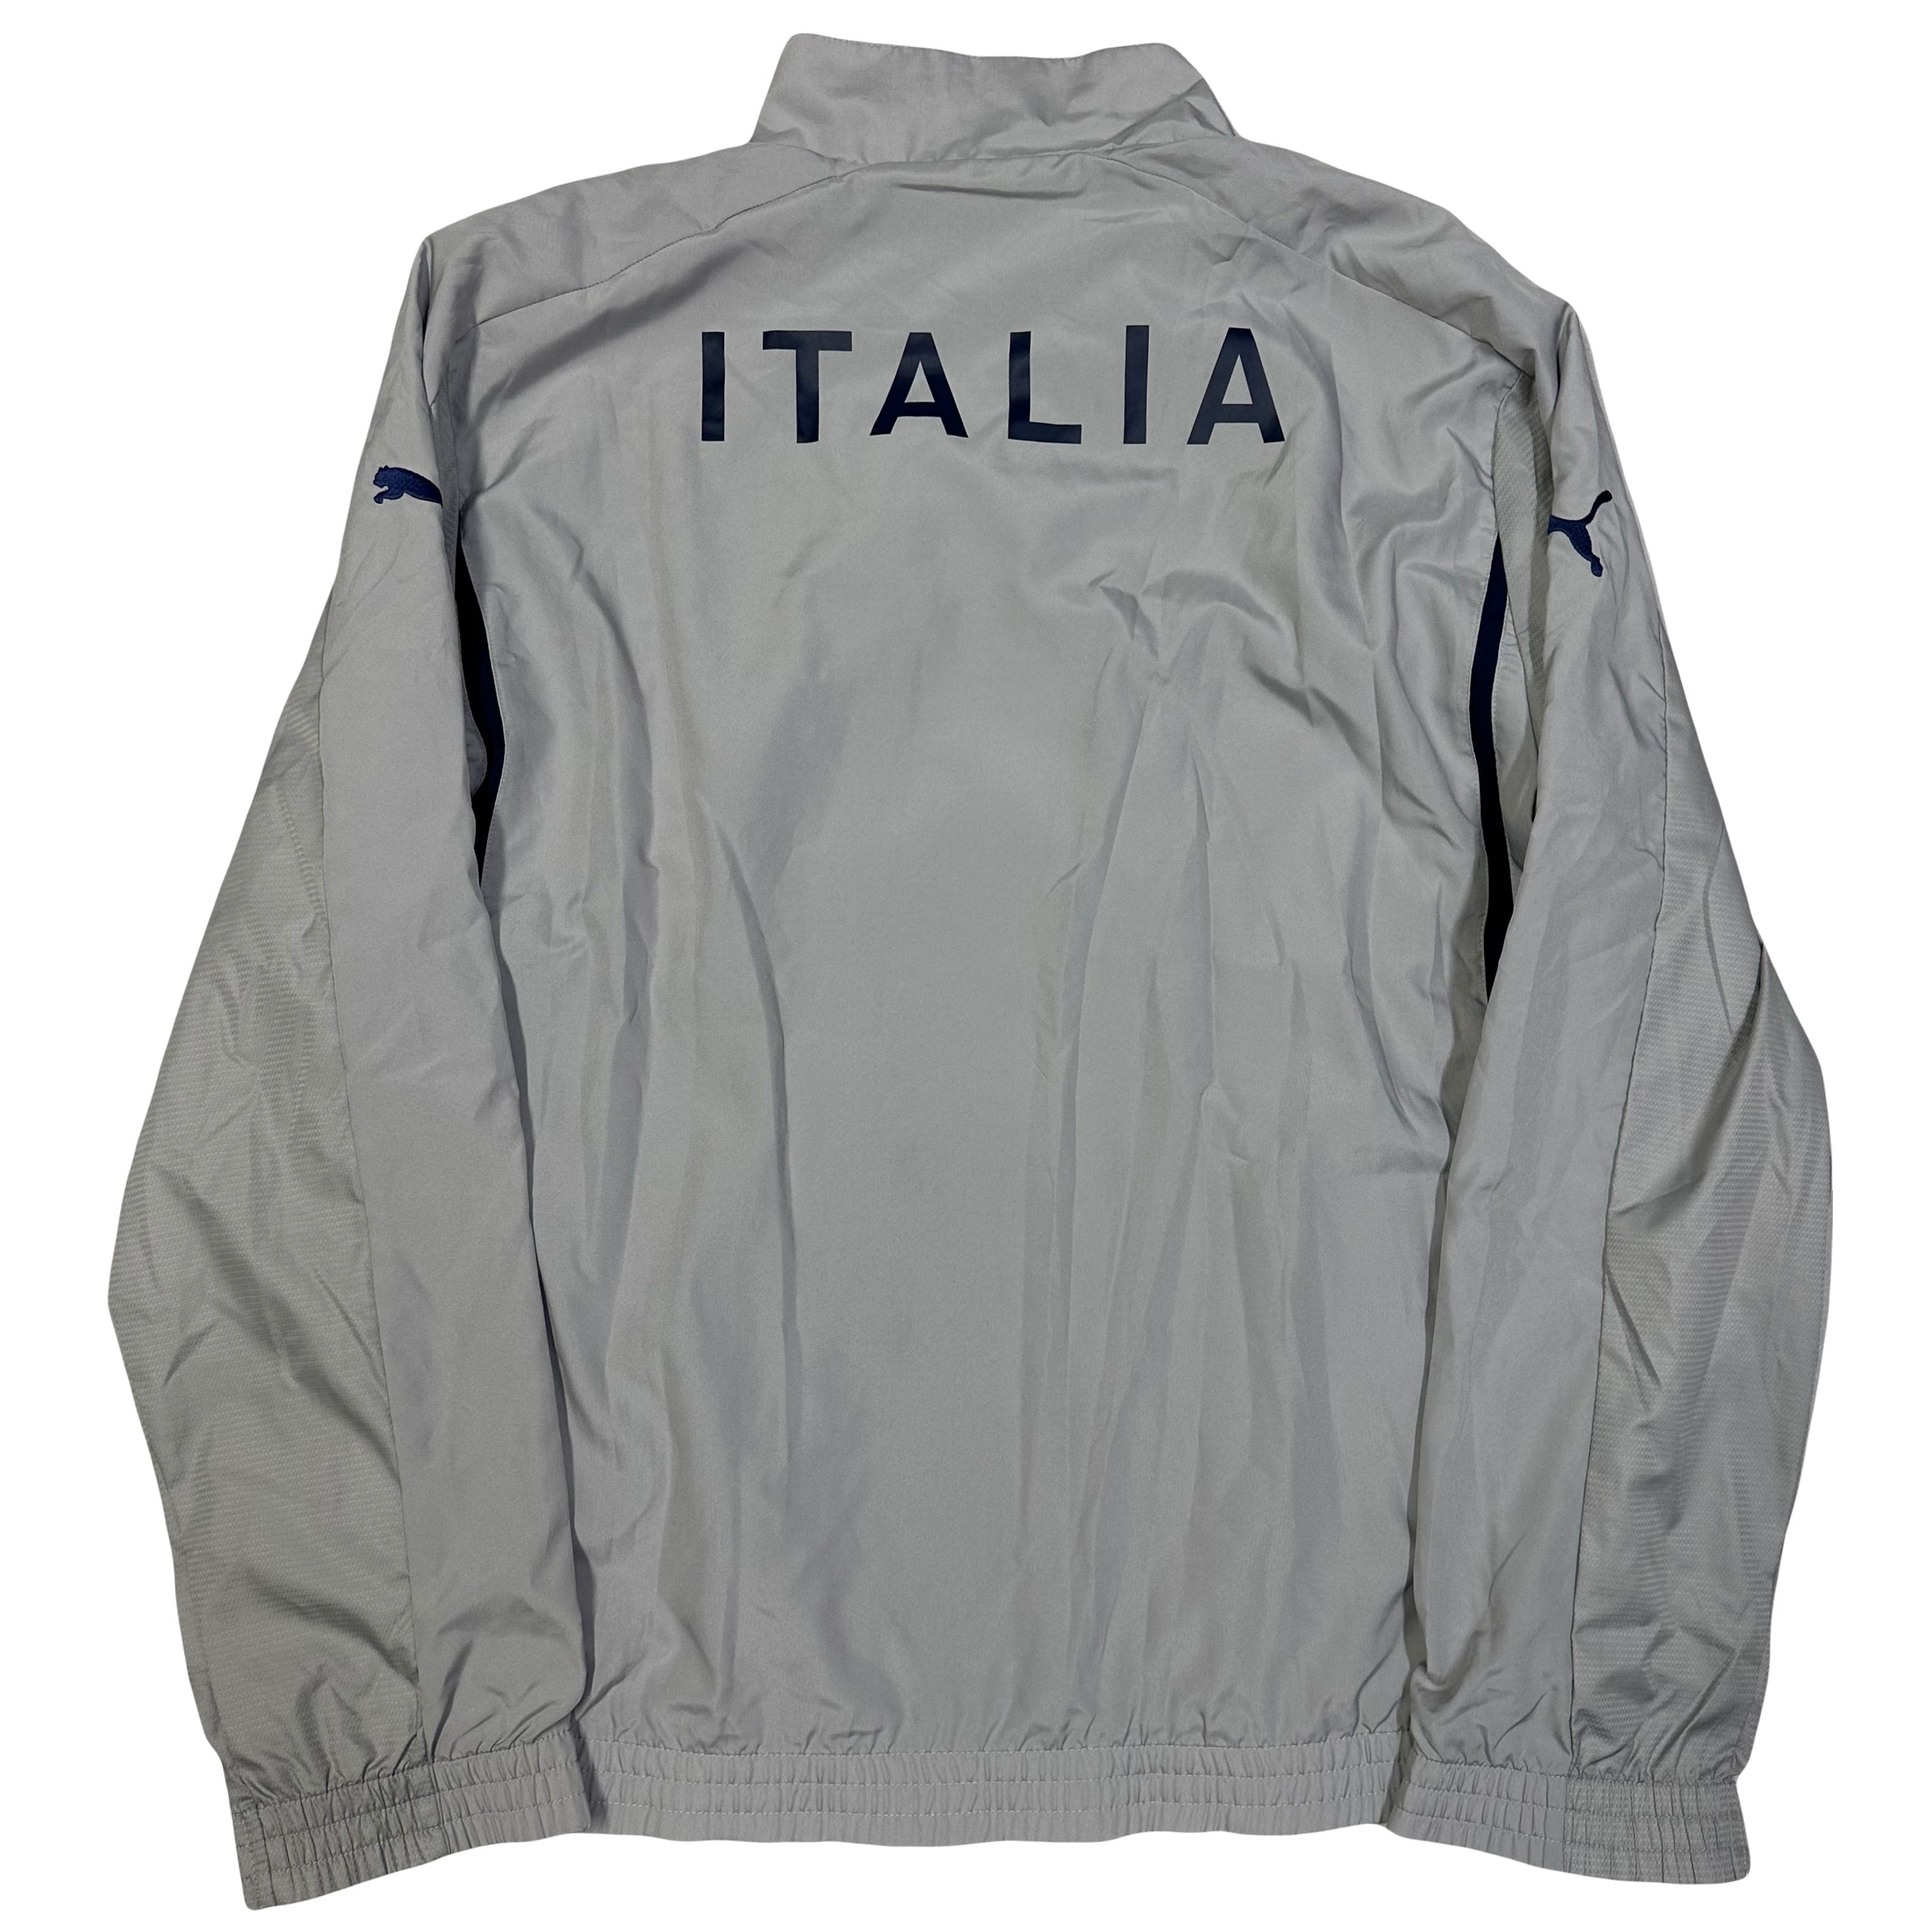 Puma Italy 2010 Tracksuit In Grey & Navy ( L )